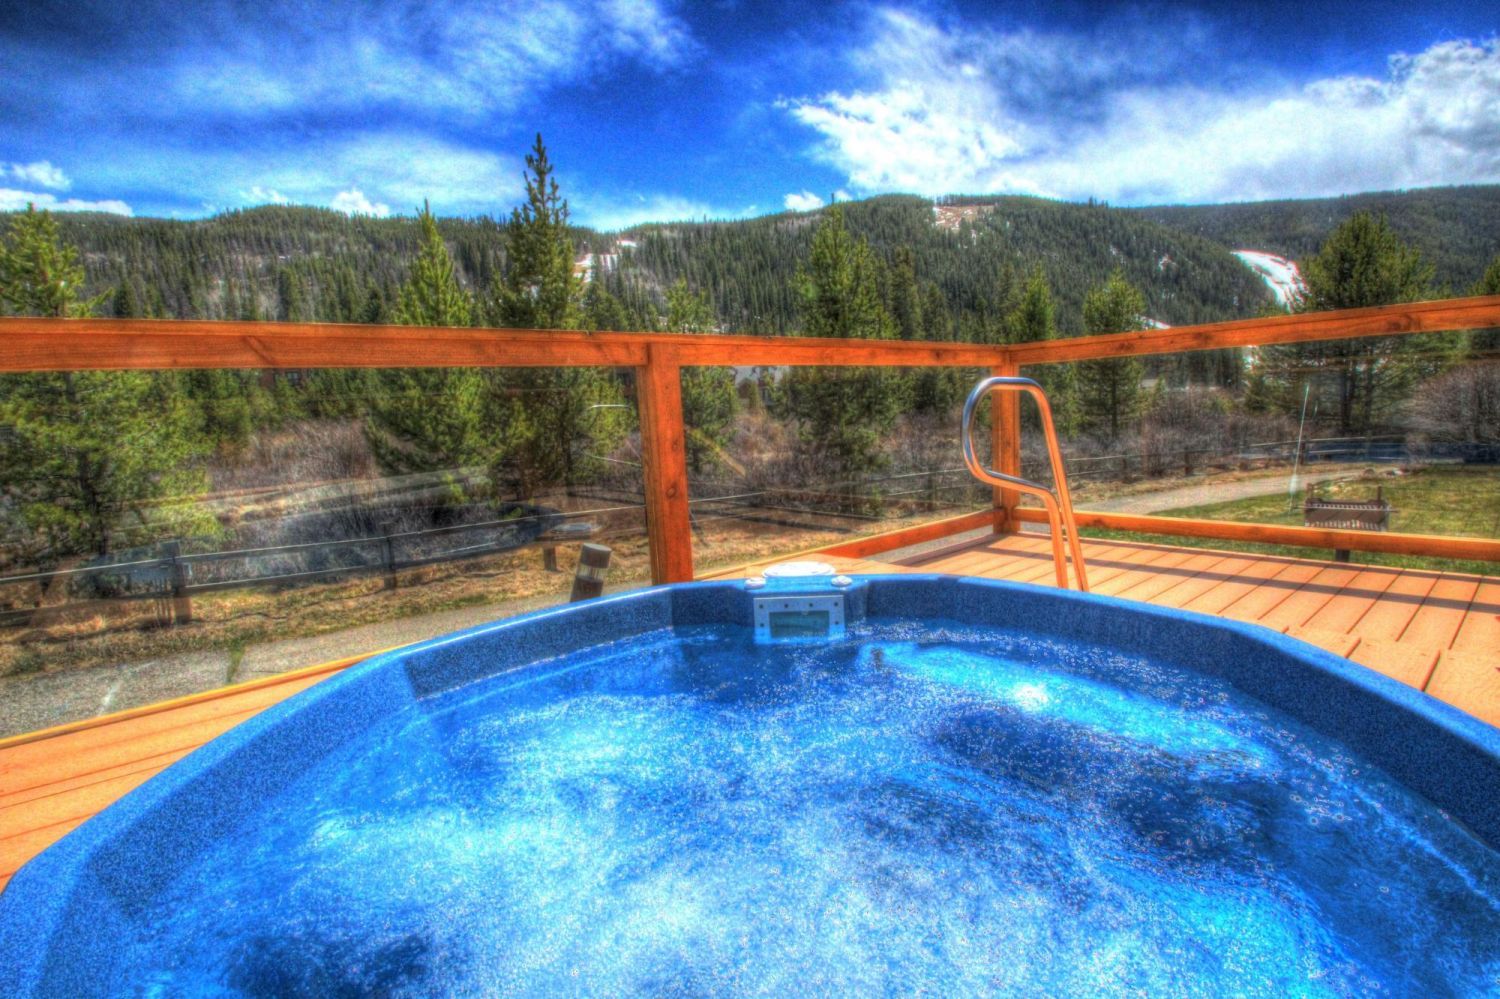 Frostfire Hot Tub - Enjoy the outdoor hot tubs and spectacular mountain views.